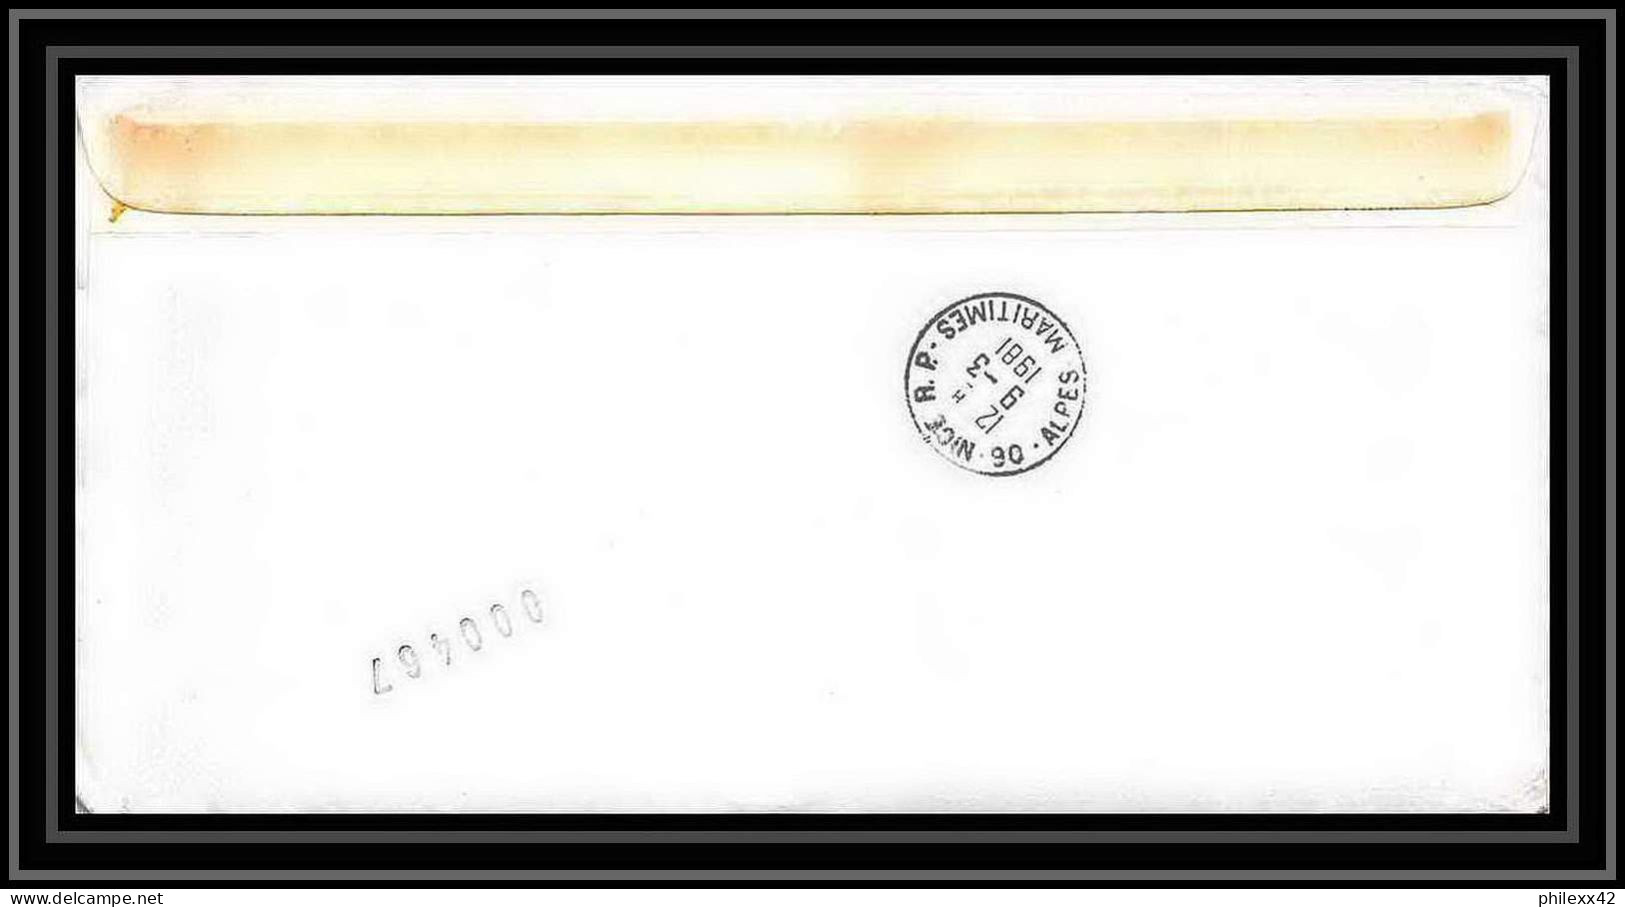 1210 Paquebot Marion Dufresne Md25 Fibex 6/3/1981 TAAF Antarctic Terres Australes Lettre (cover) Signé Signed - Storia Postale